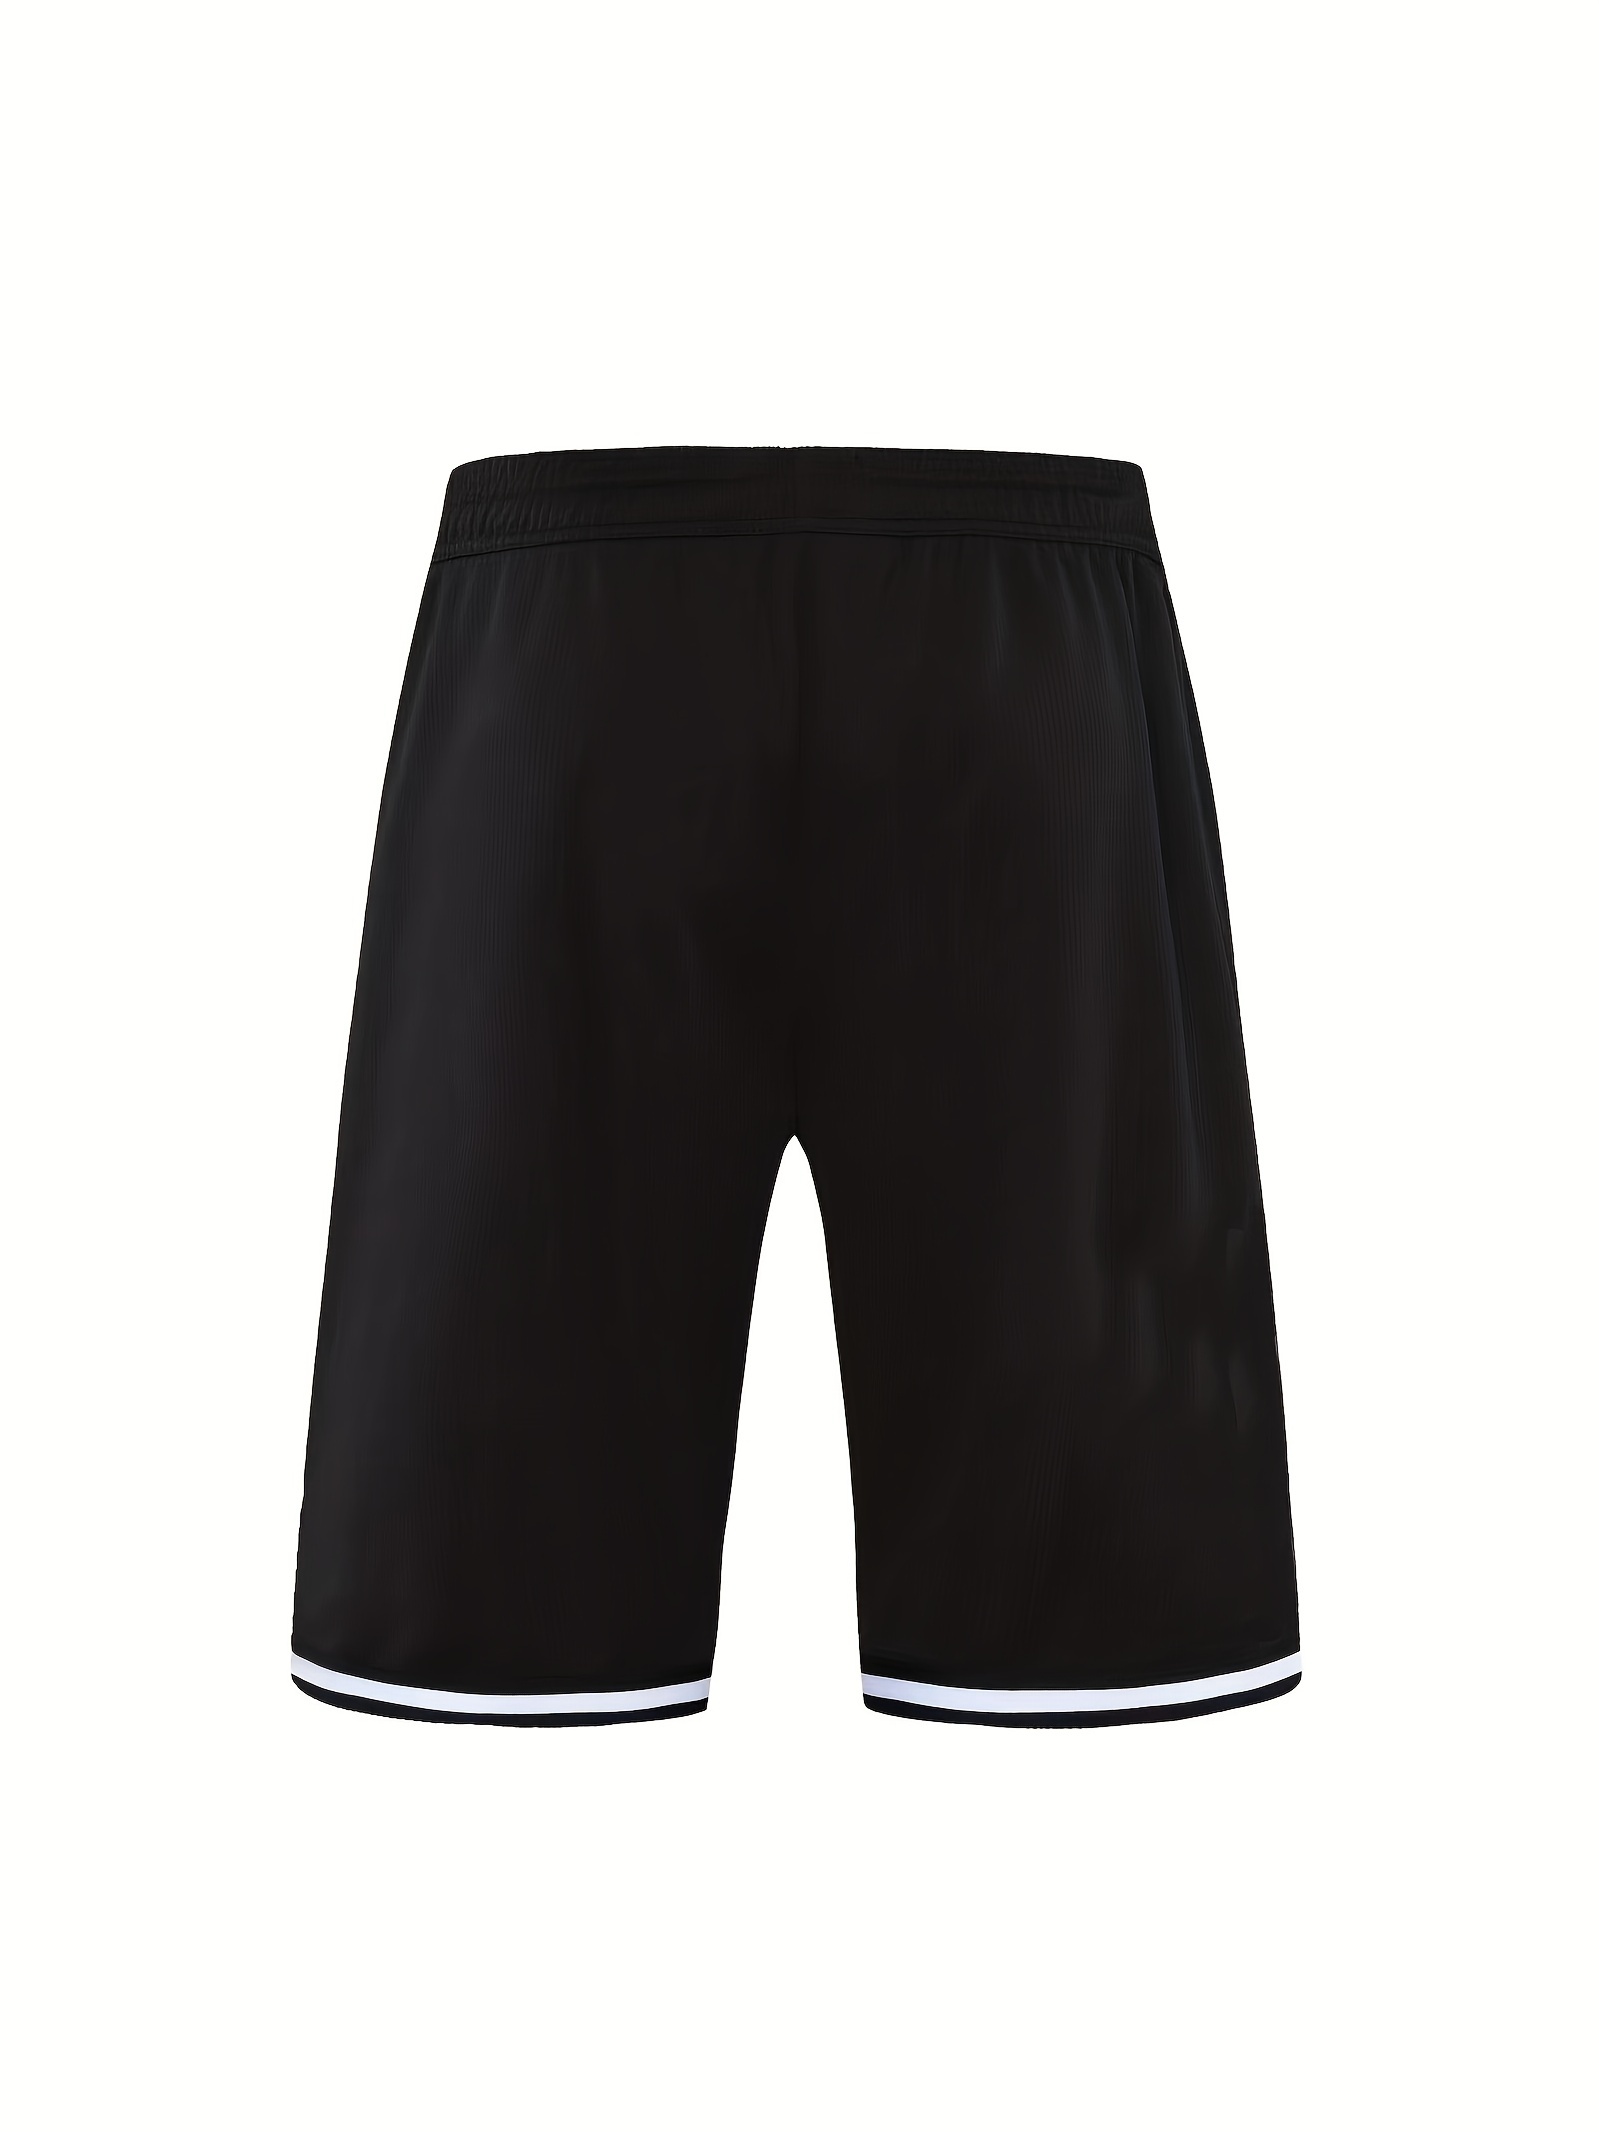 Trendy Men's Tear Away Basketball Shorts with Side Snap, Elastic Waist &  Drawstring | Cotton/Polyester Blend